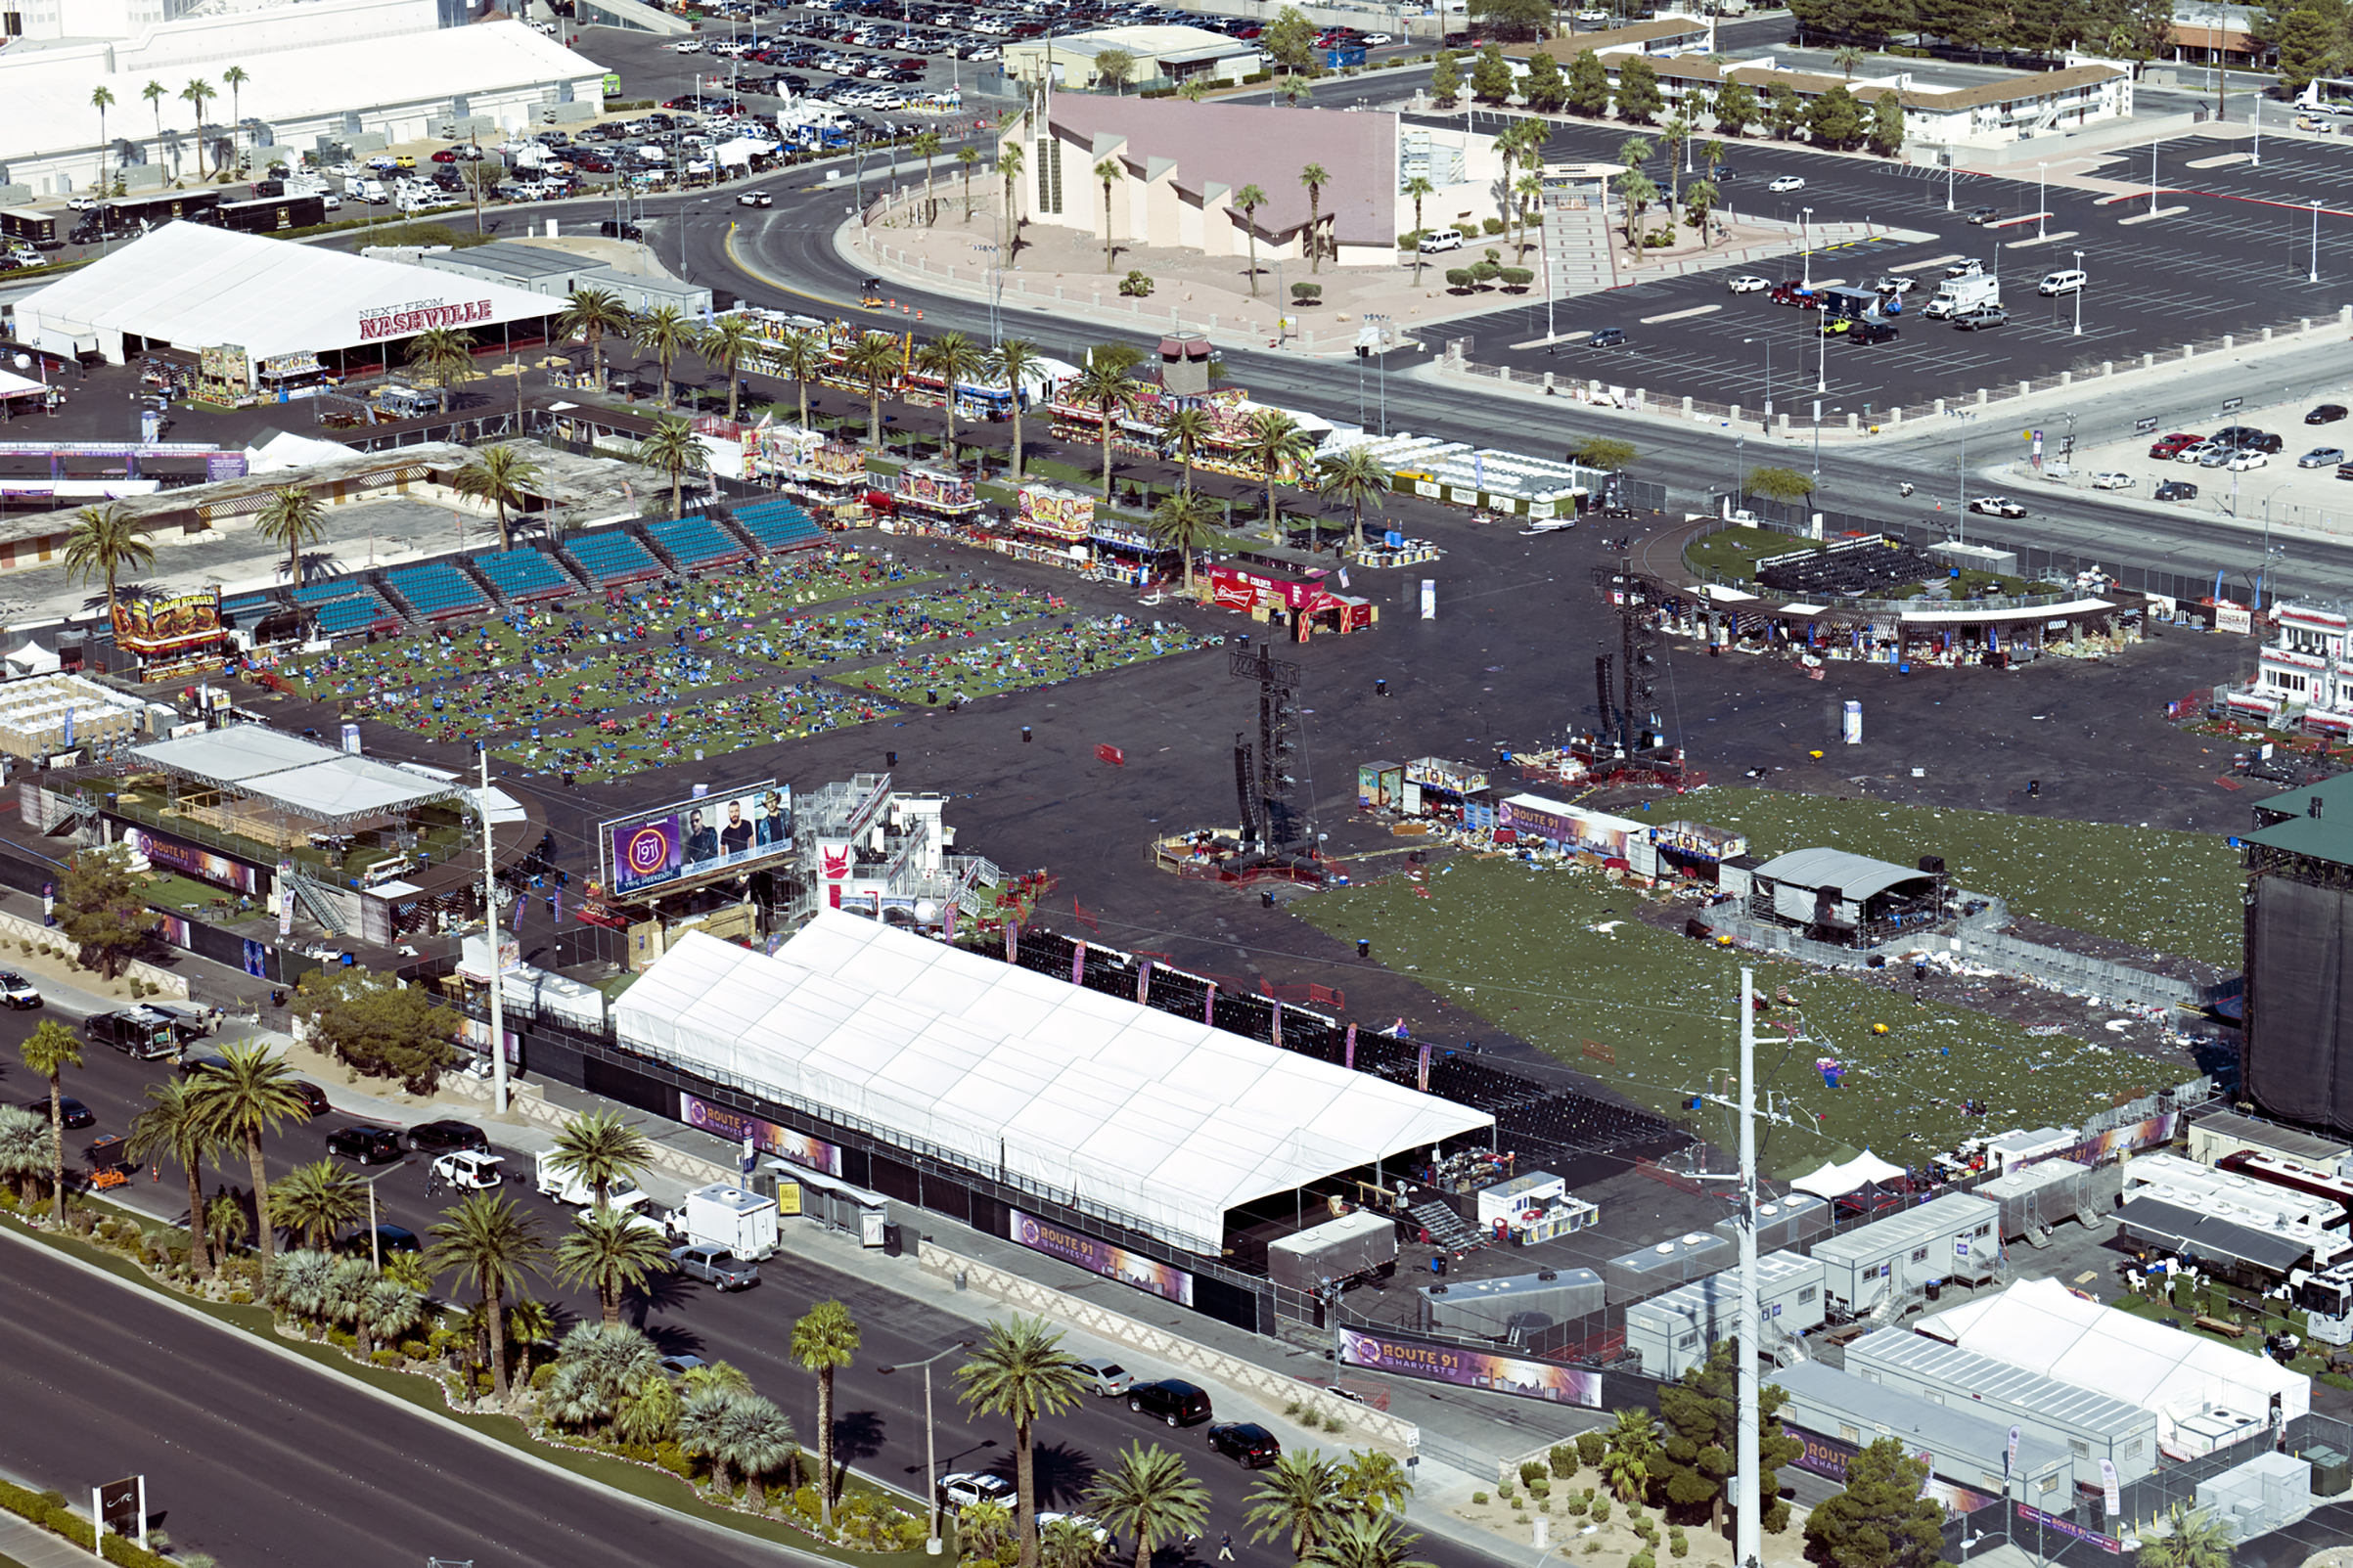 View of the festival grounds showing scattered belongings and chairs, left behind at the site of the mass shooting, Oct. 3, 2017.